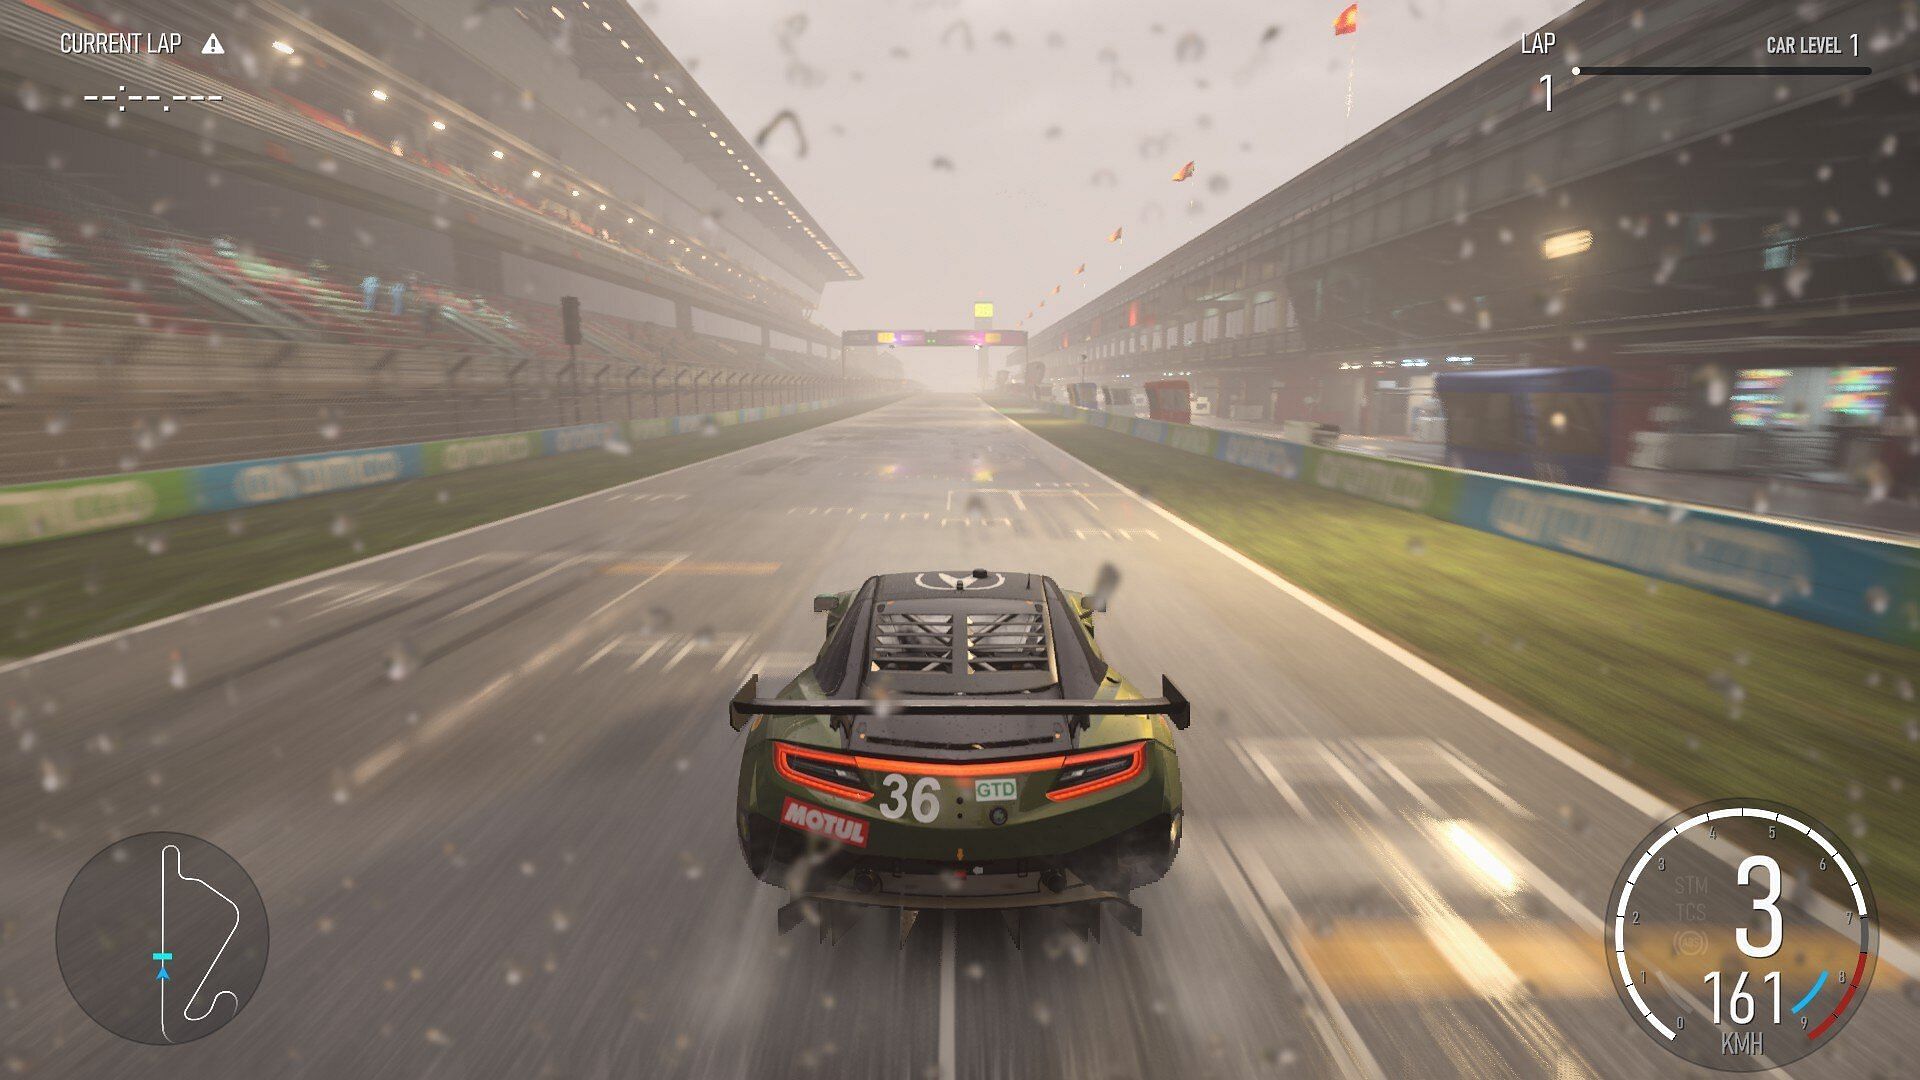 Breathtaking visuals, thanks to the latest iteration of the ForzaTech engine (Image via Forza Motorsport)